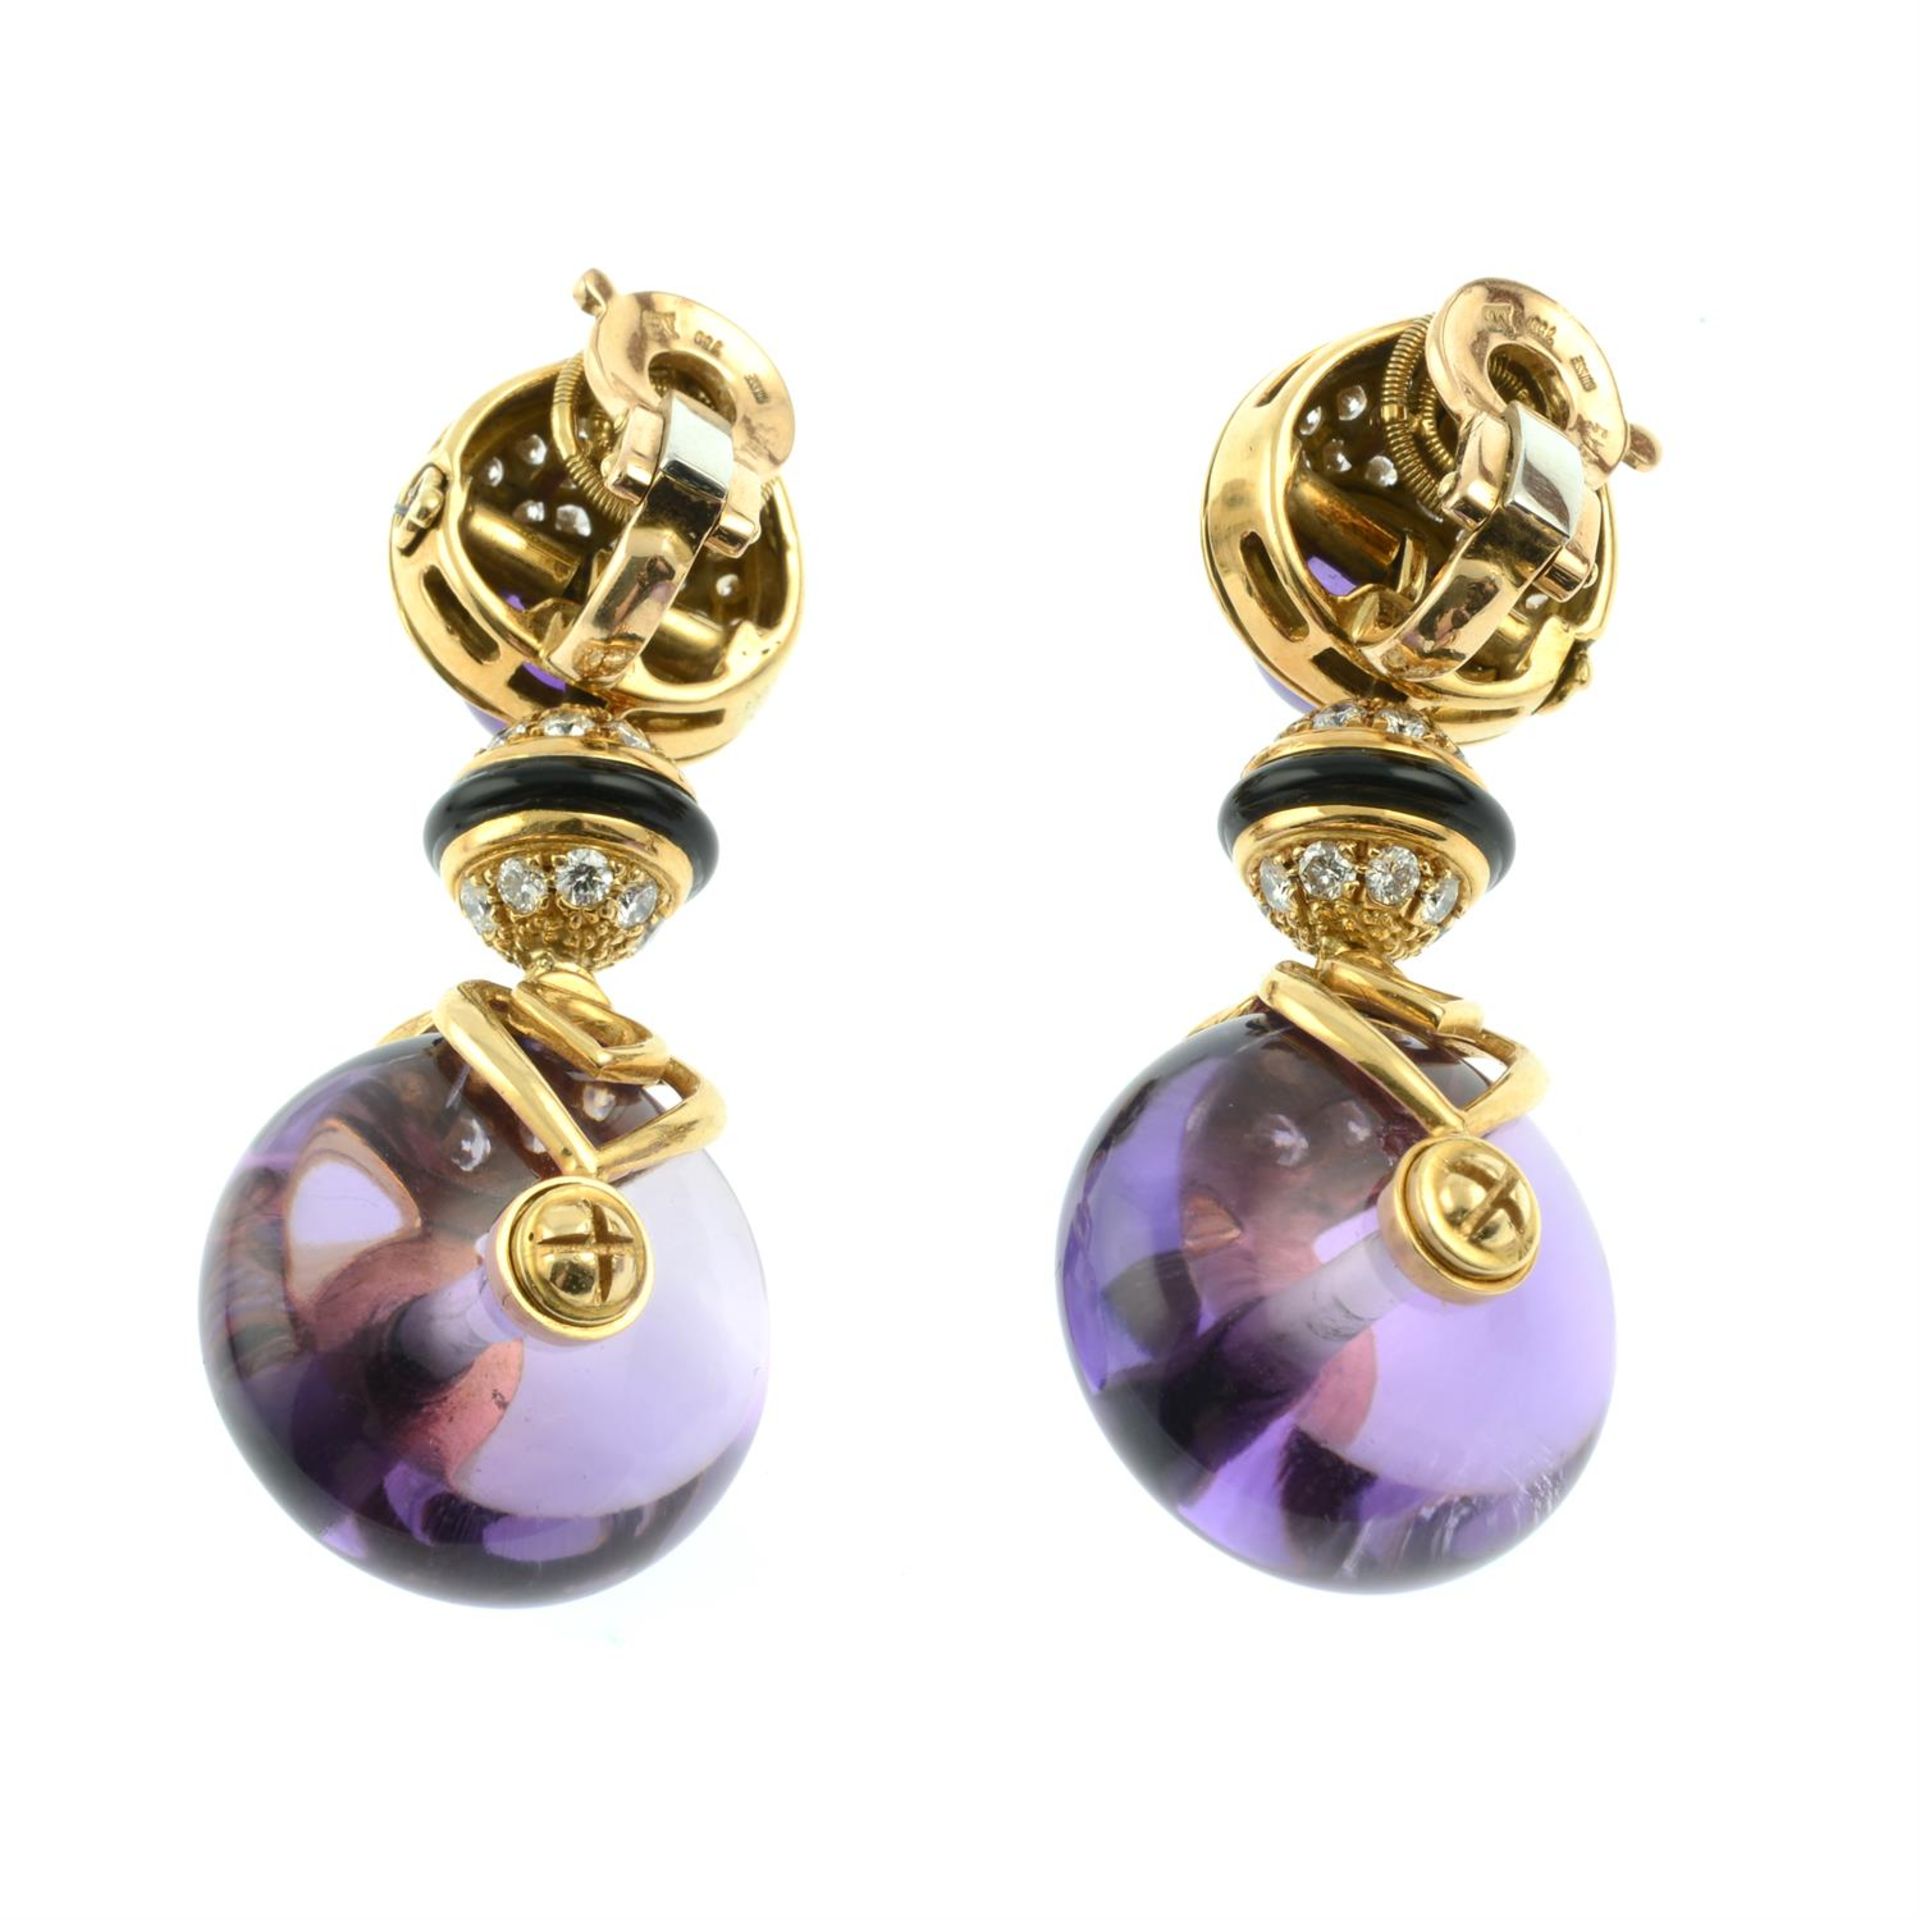 A pair of amethyst, onyx and pavé-set diamond earrings, by Marina B. - Image 3 of 3